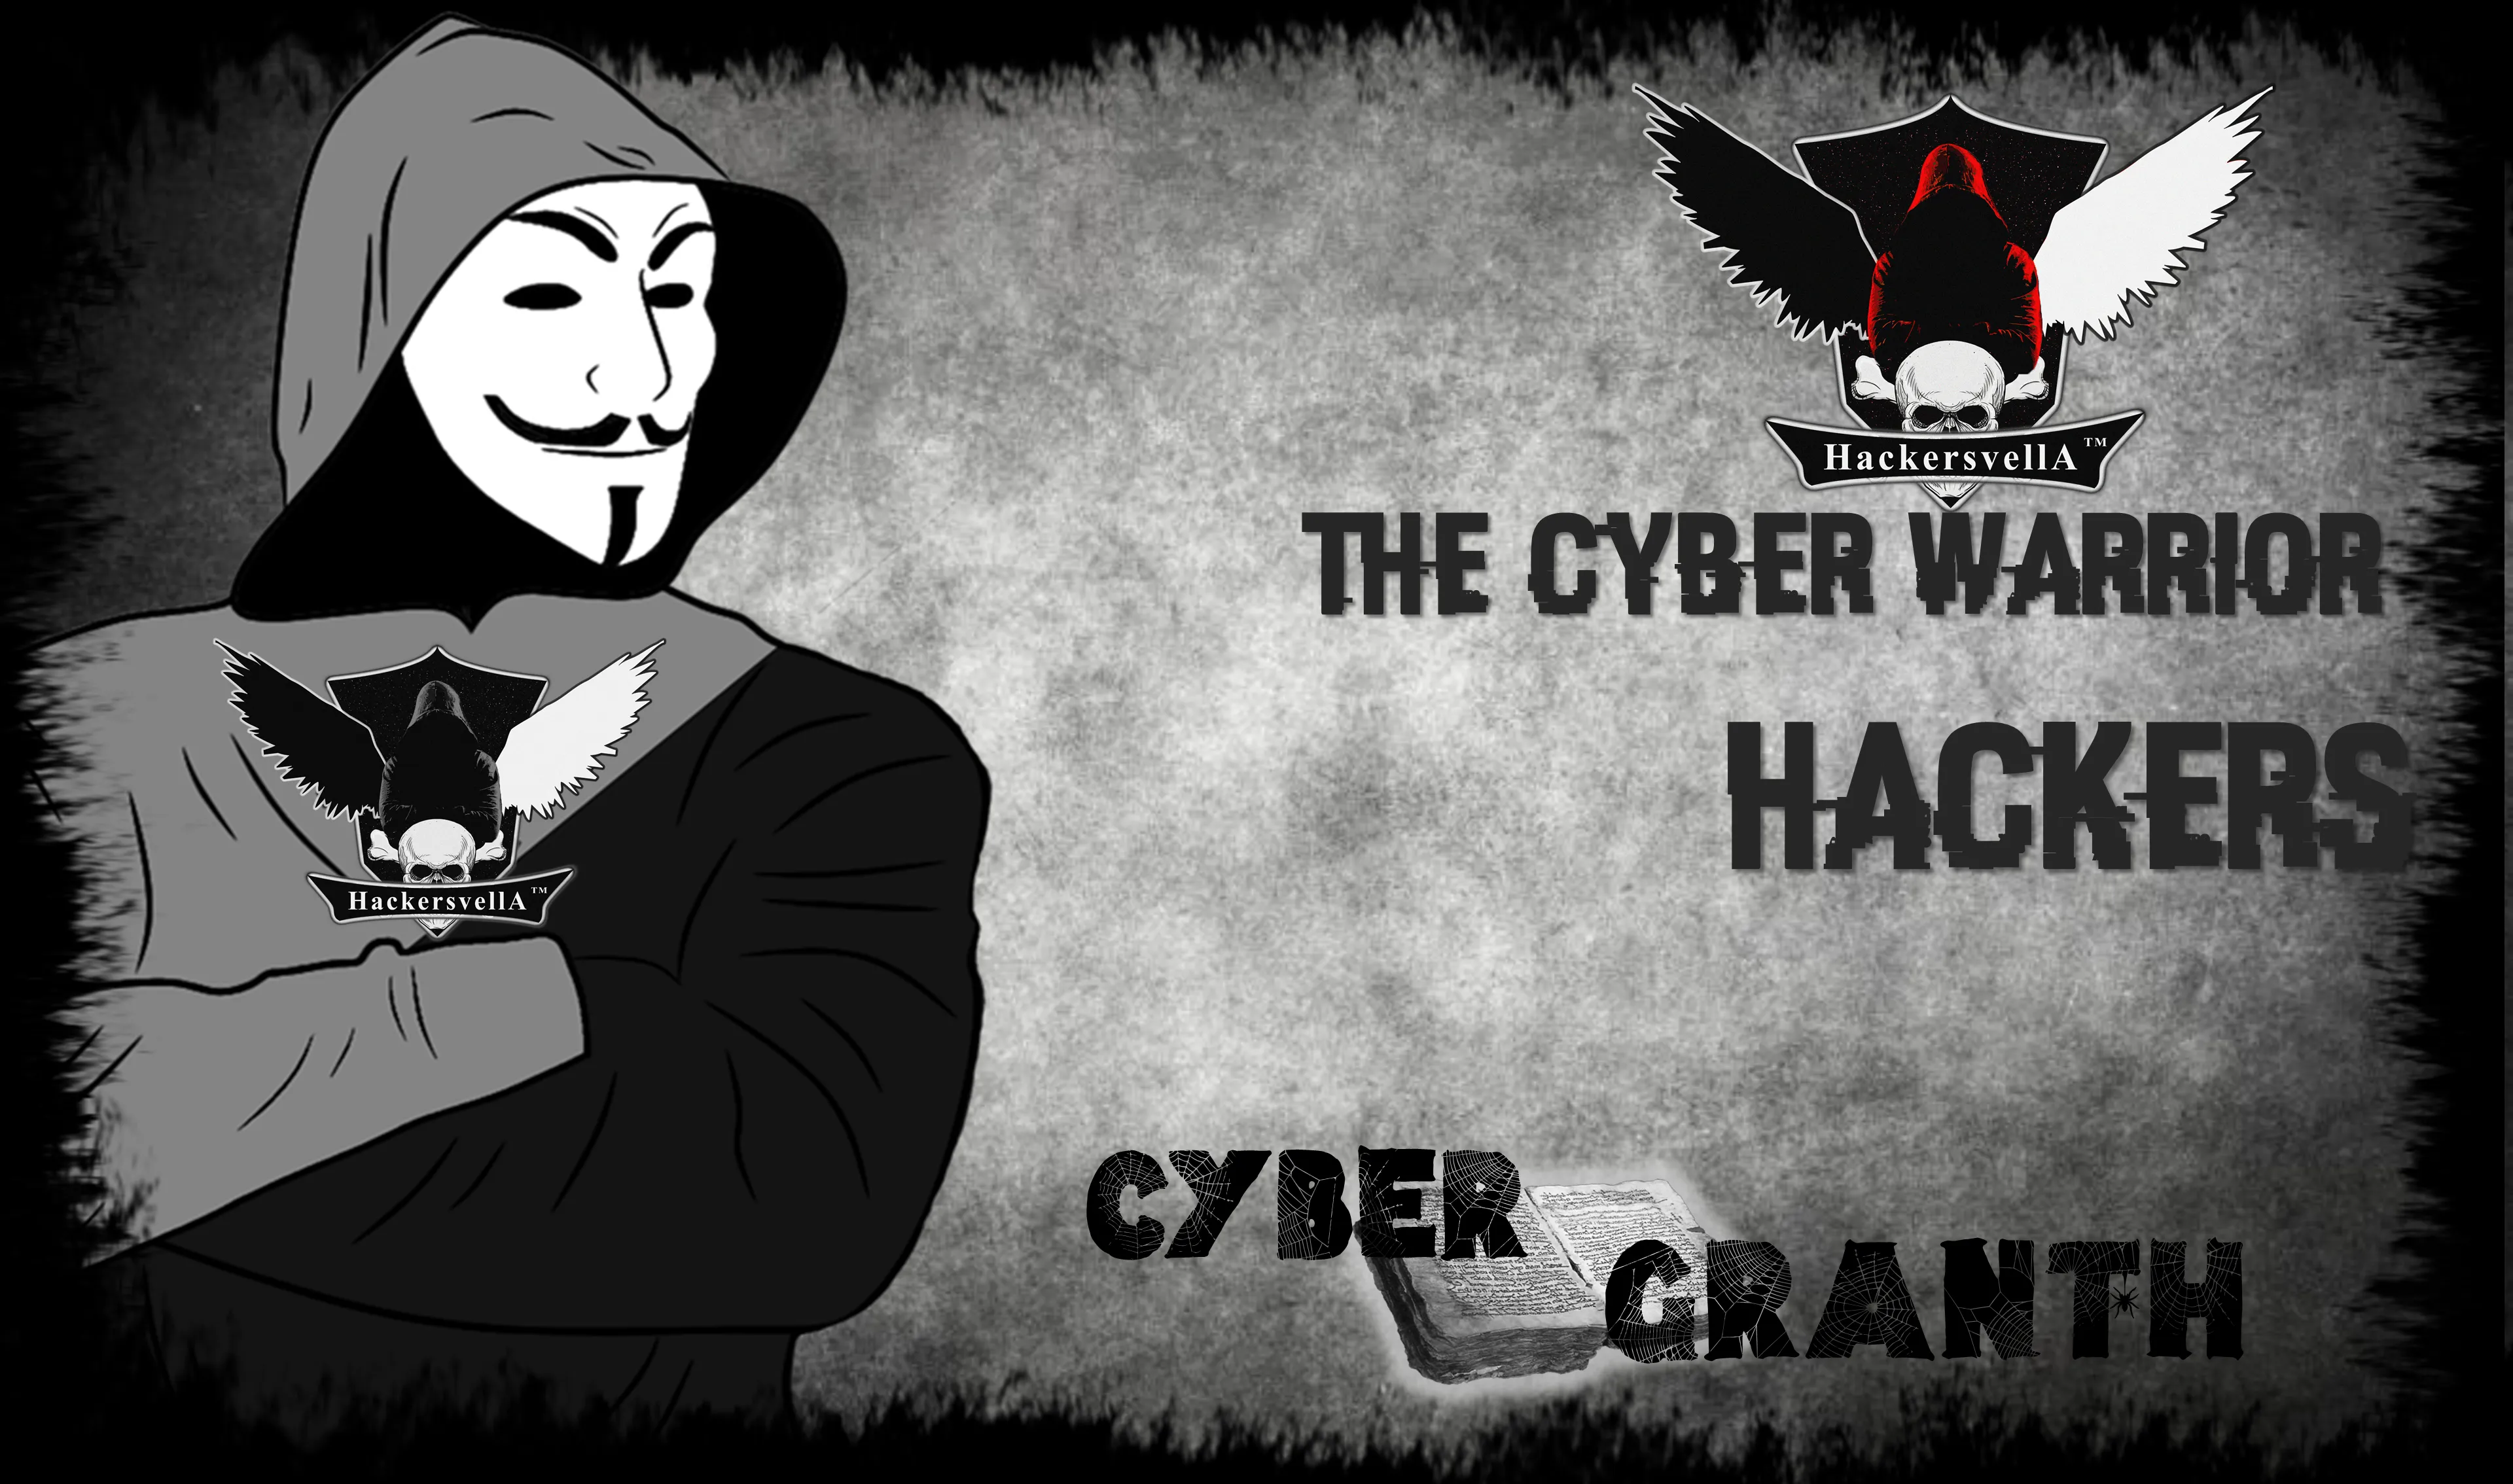 THE CYBER WARRIOR: HACKERS